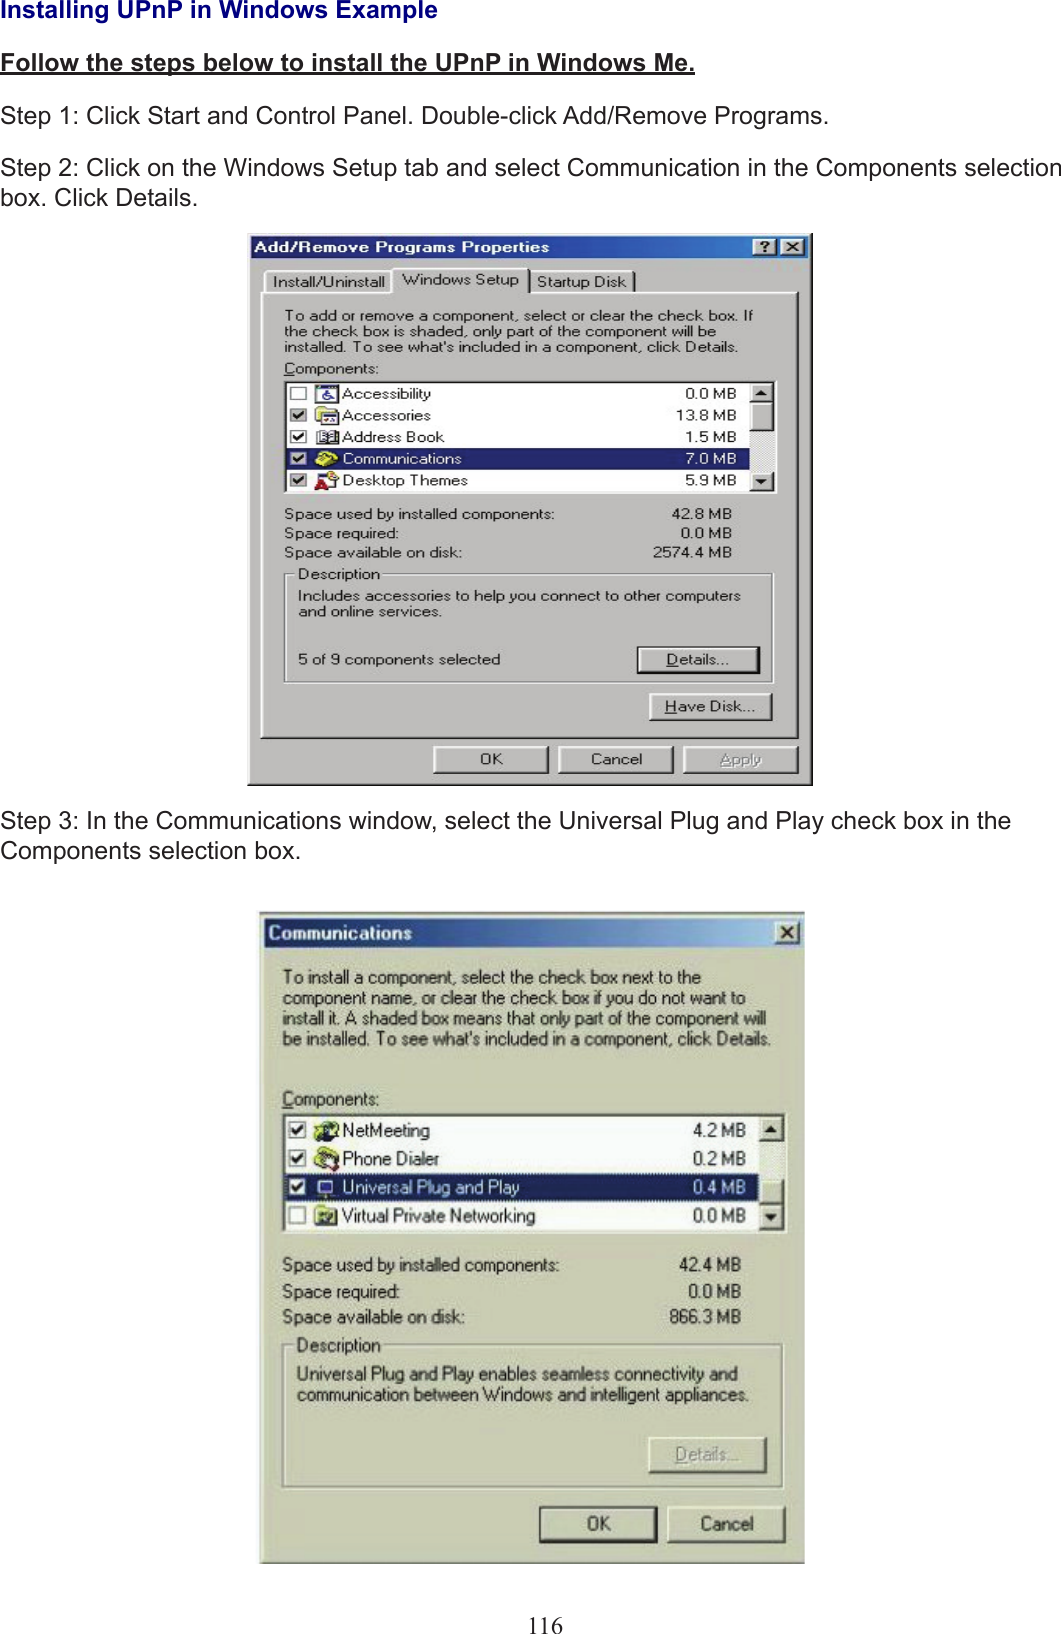 116Installing UPnP in Windows ExampleFollow the steps below to install the UPnP in Windows Me.Step 1: Click Start and Control Panel. Double-click Add/Remove Programs.Step 2: Click on the Windows Setup tab and select Communication in the Components selection box. Click Details.Step 3: In the Communications window, select the Universal Plug and Play check box in the Components selection box.